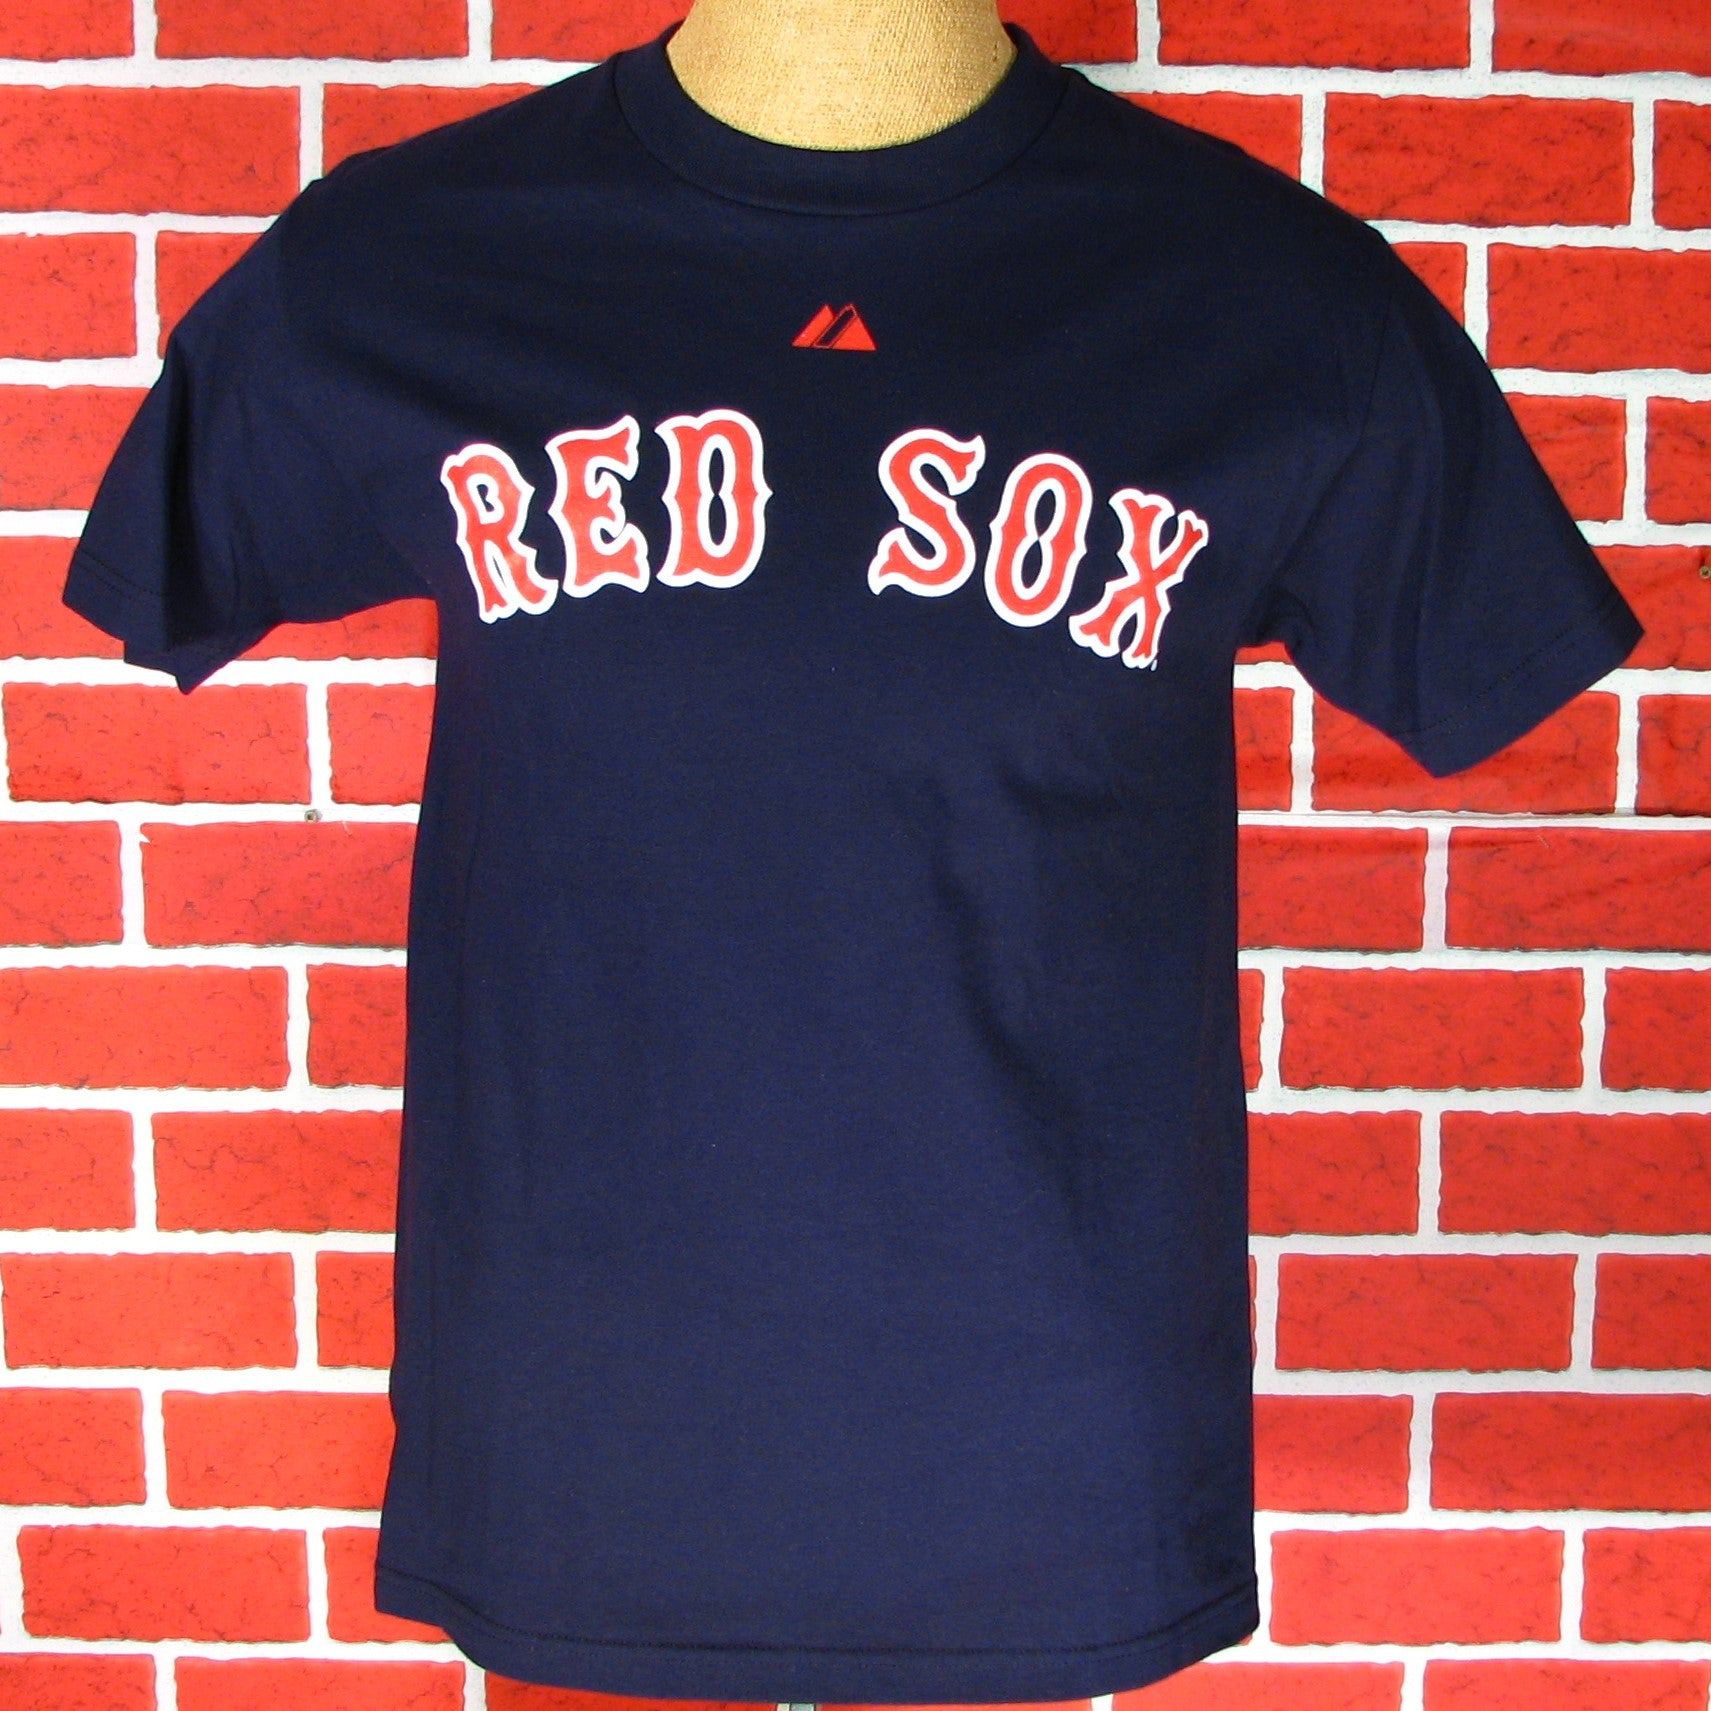 red sox pedroia shirt